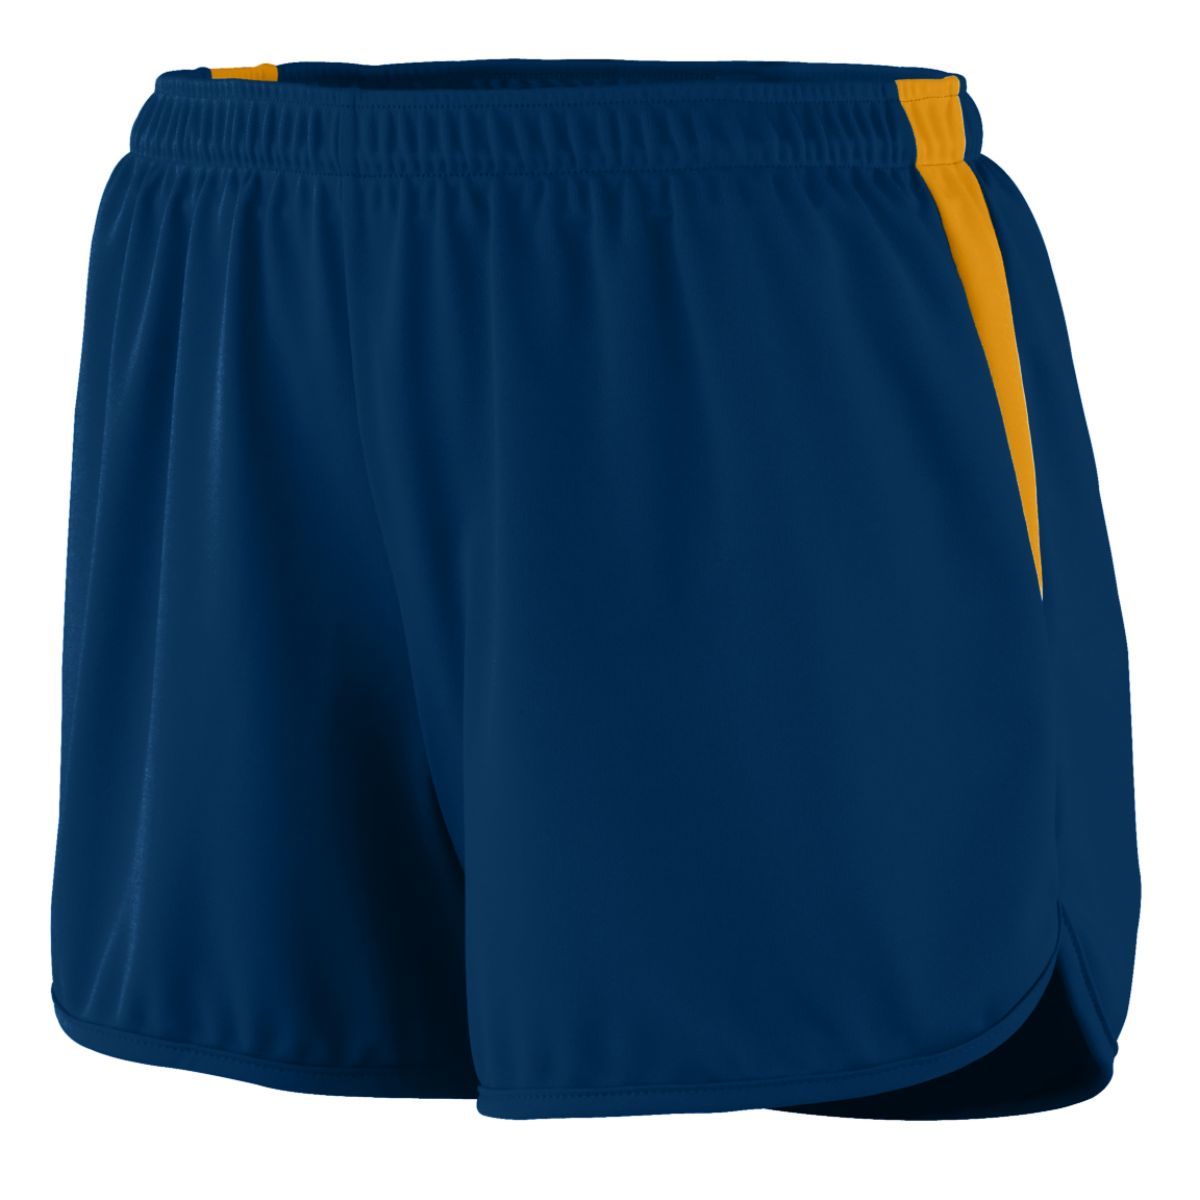 Augusta Sportswear Ladies Rapidpace Track Shorts in Navy/Gold  -Part of the Ladies, Ladies-Shorts, Augusta-Products, Track-Field product lines at KanaleyCreations.com